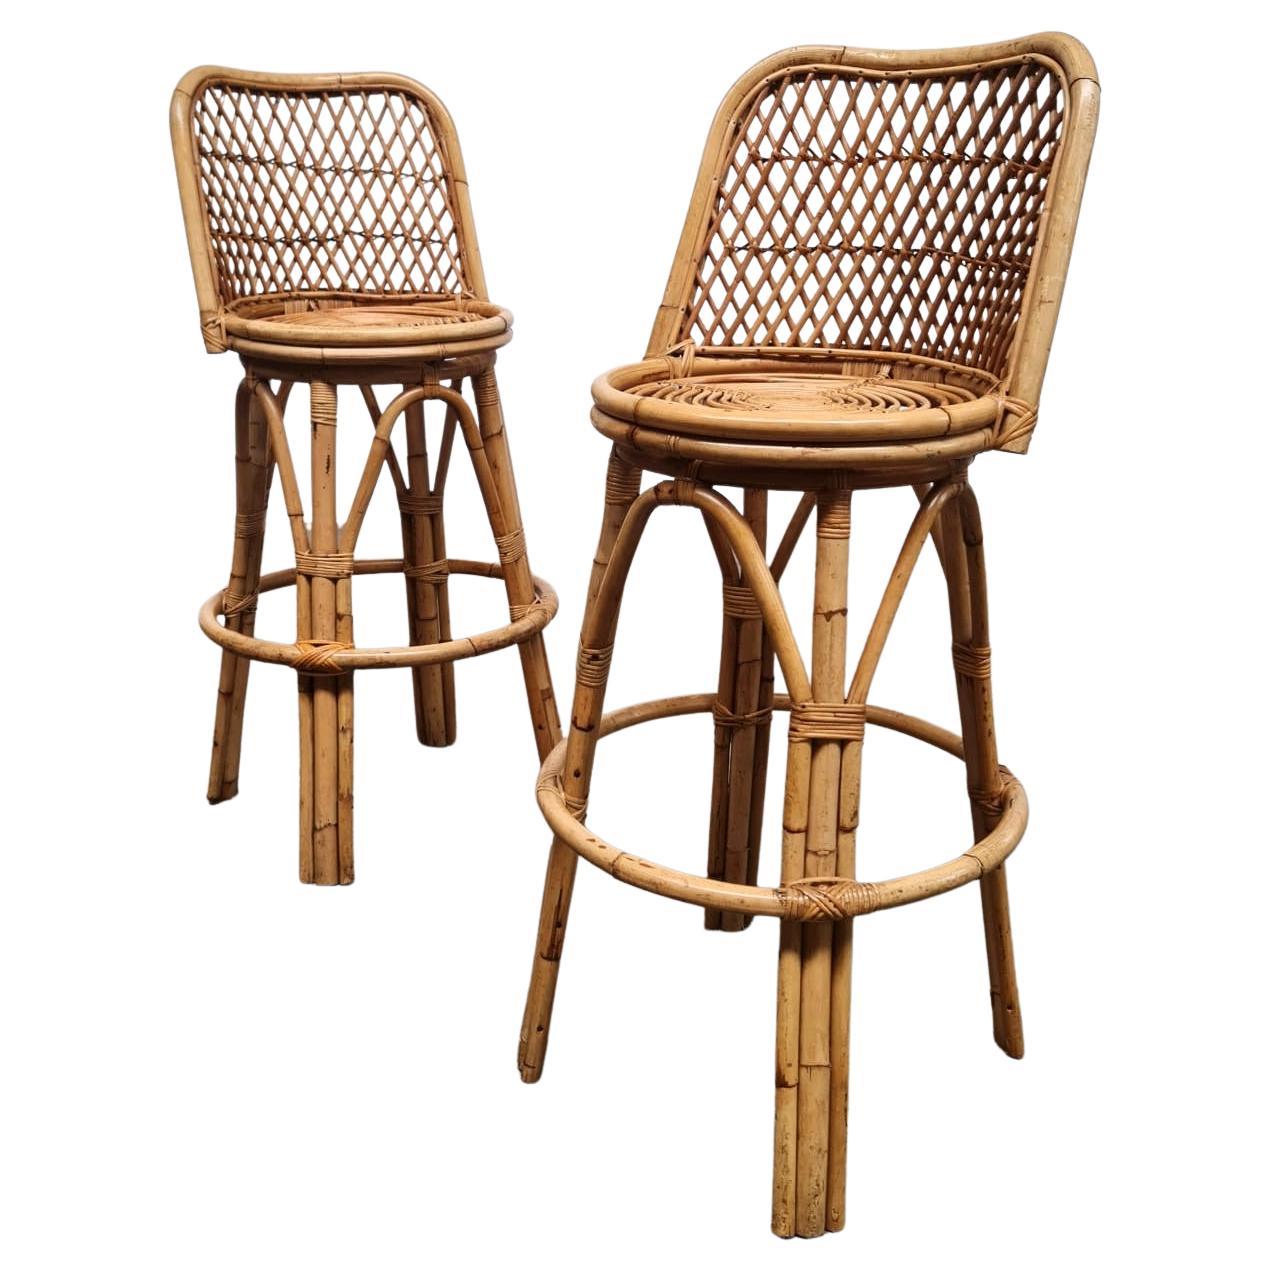 1960s Cane Bamboo Barstools For Sale